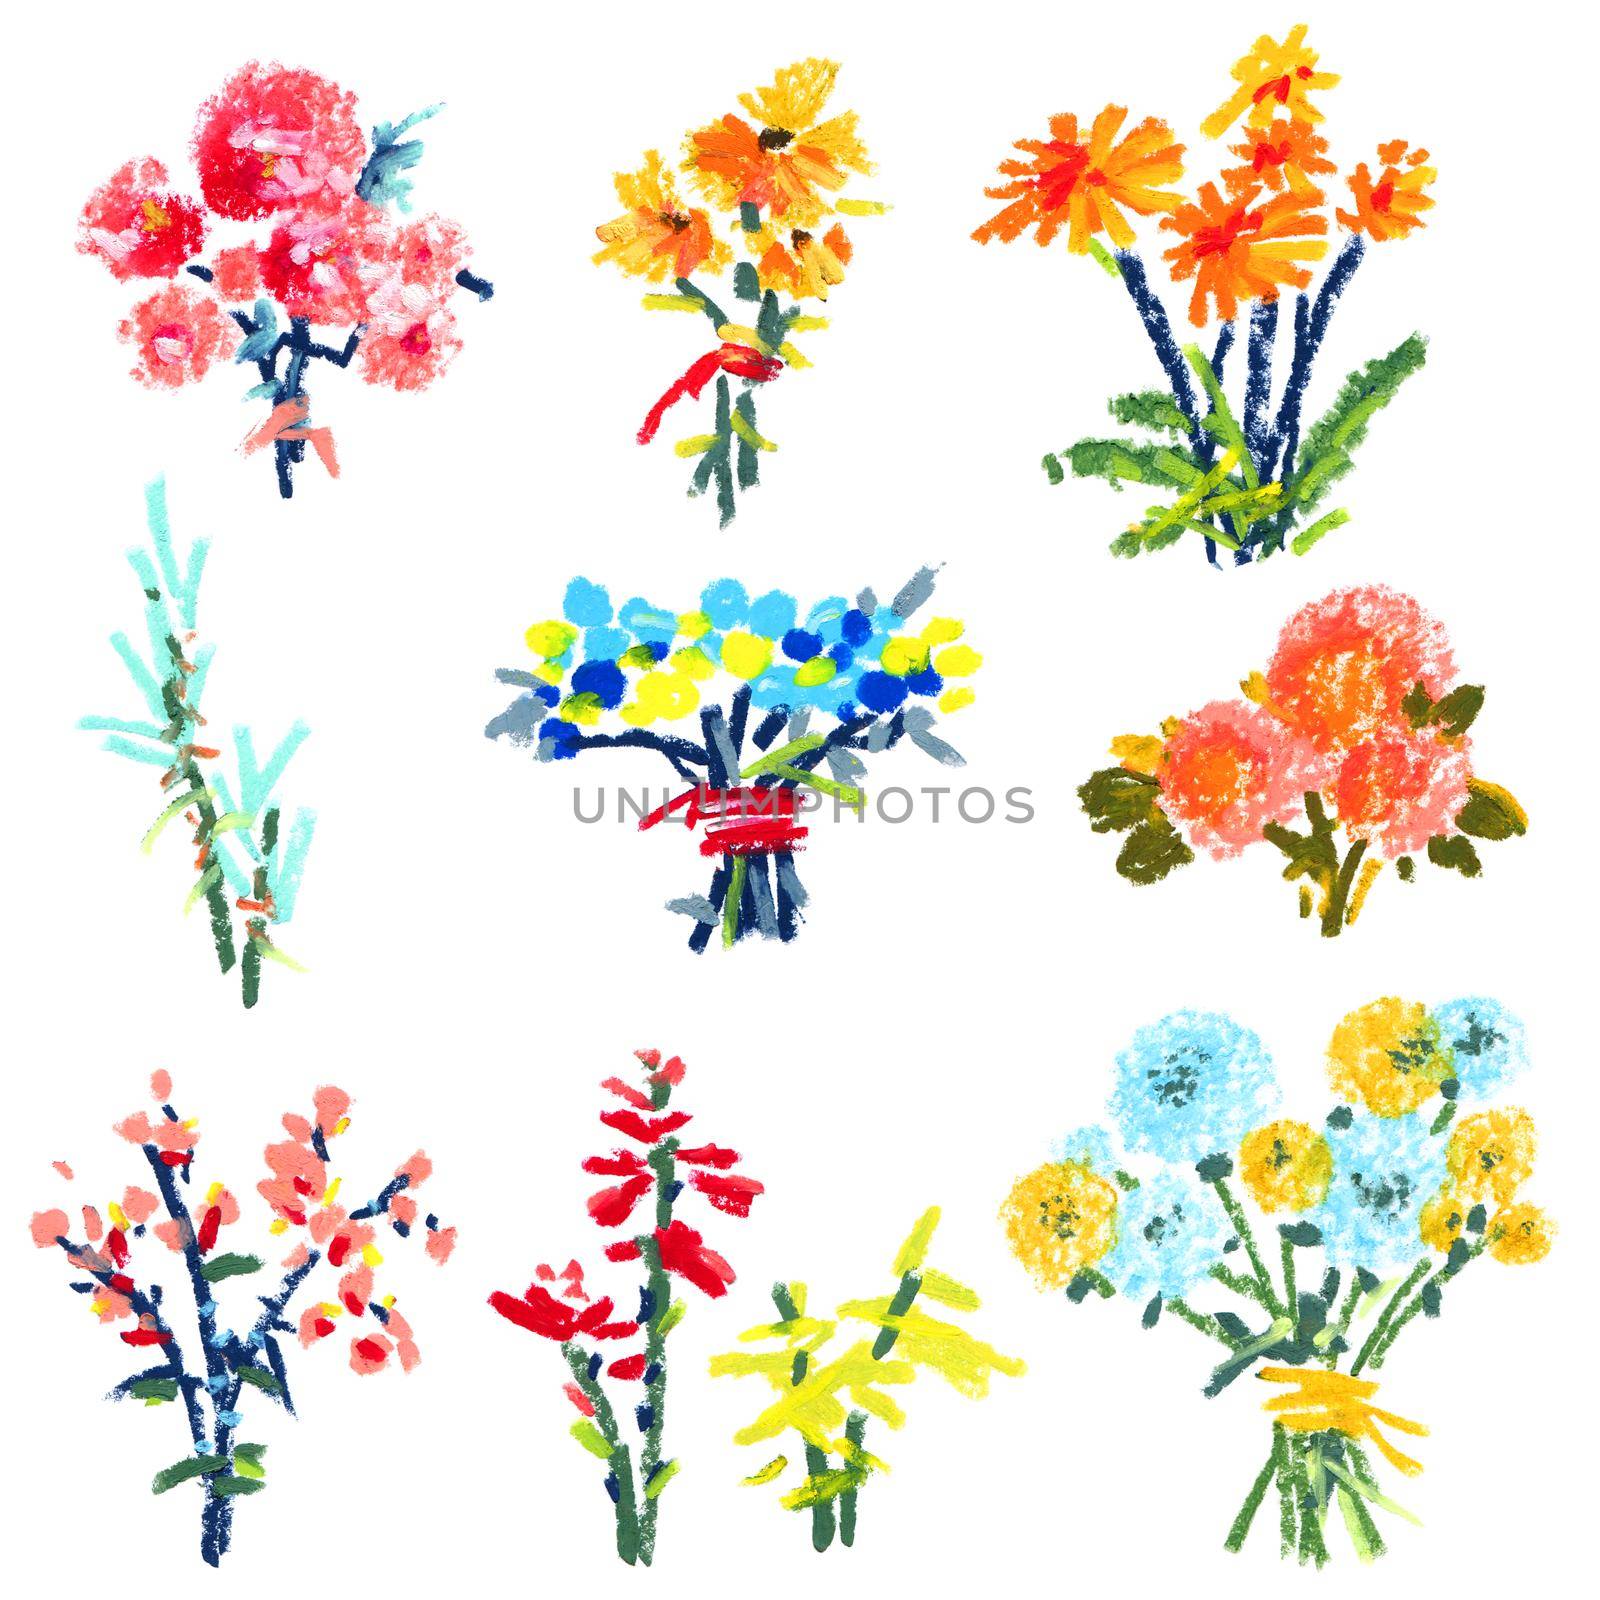 Oil illustration of flowers on white background - bouquets and twigs